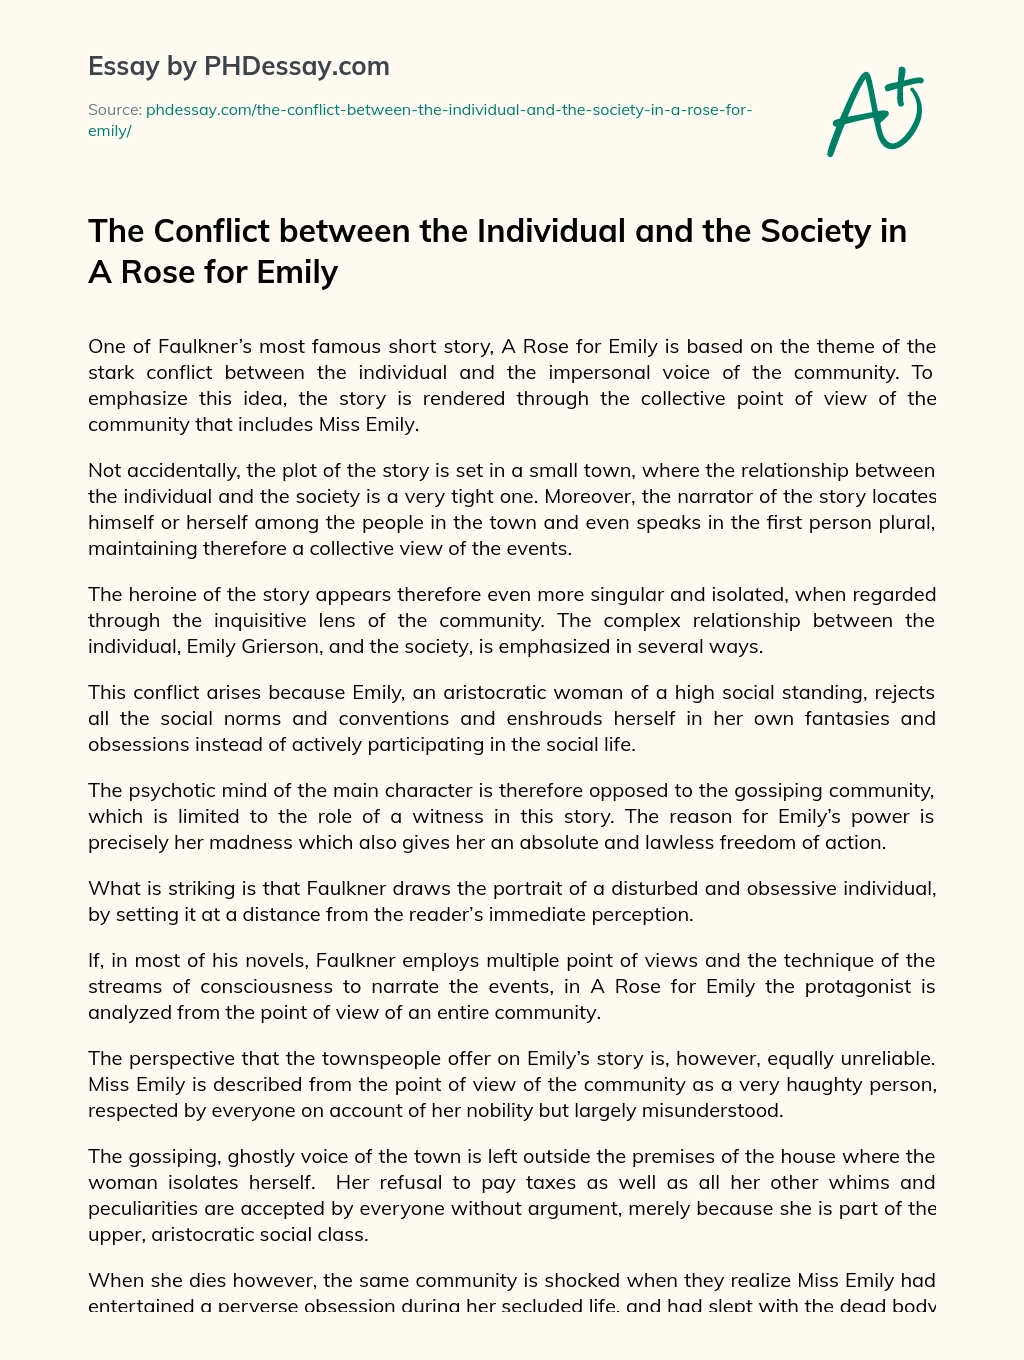 The Conflict between the Individual and the Society in A Rose for Emily essay